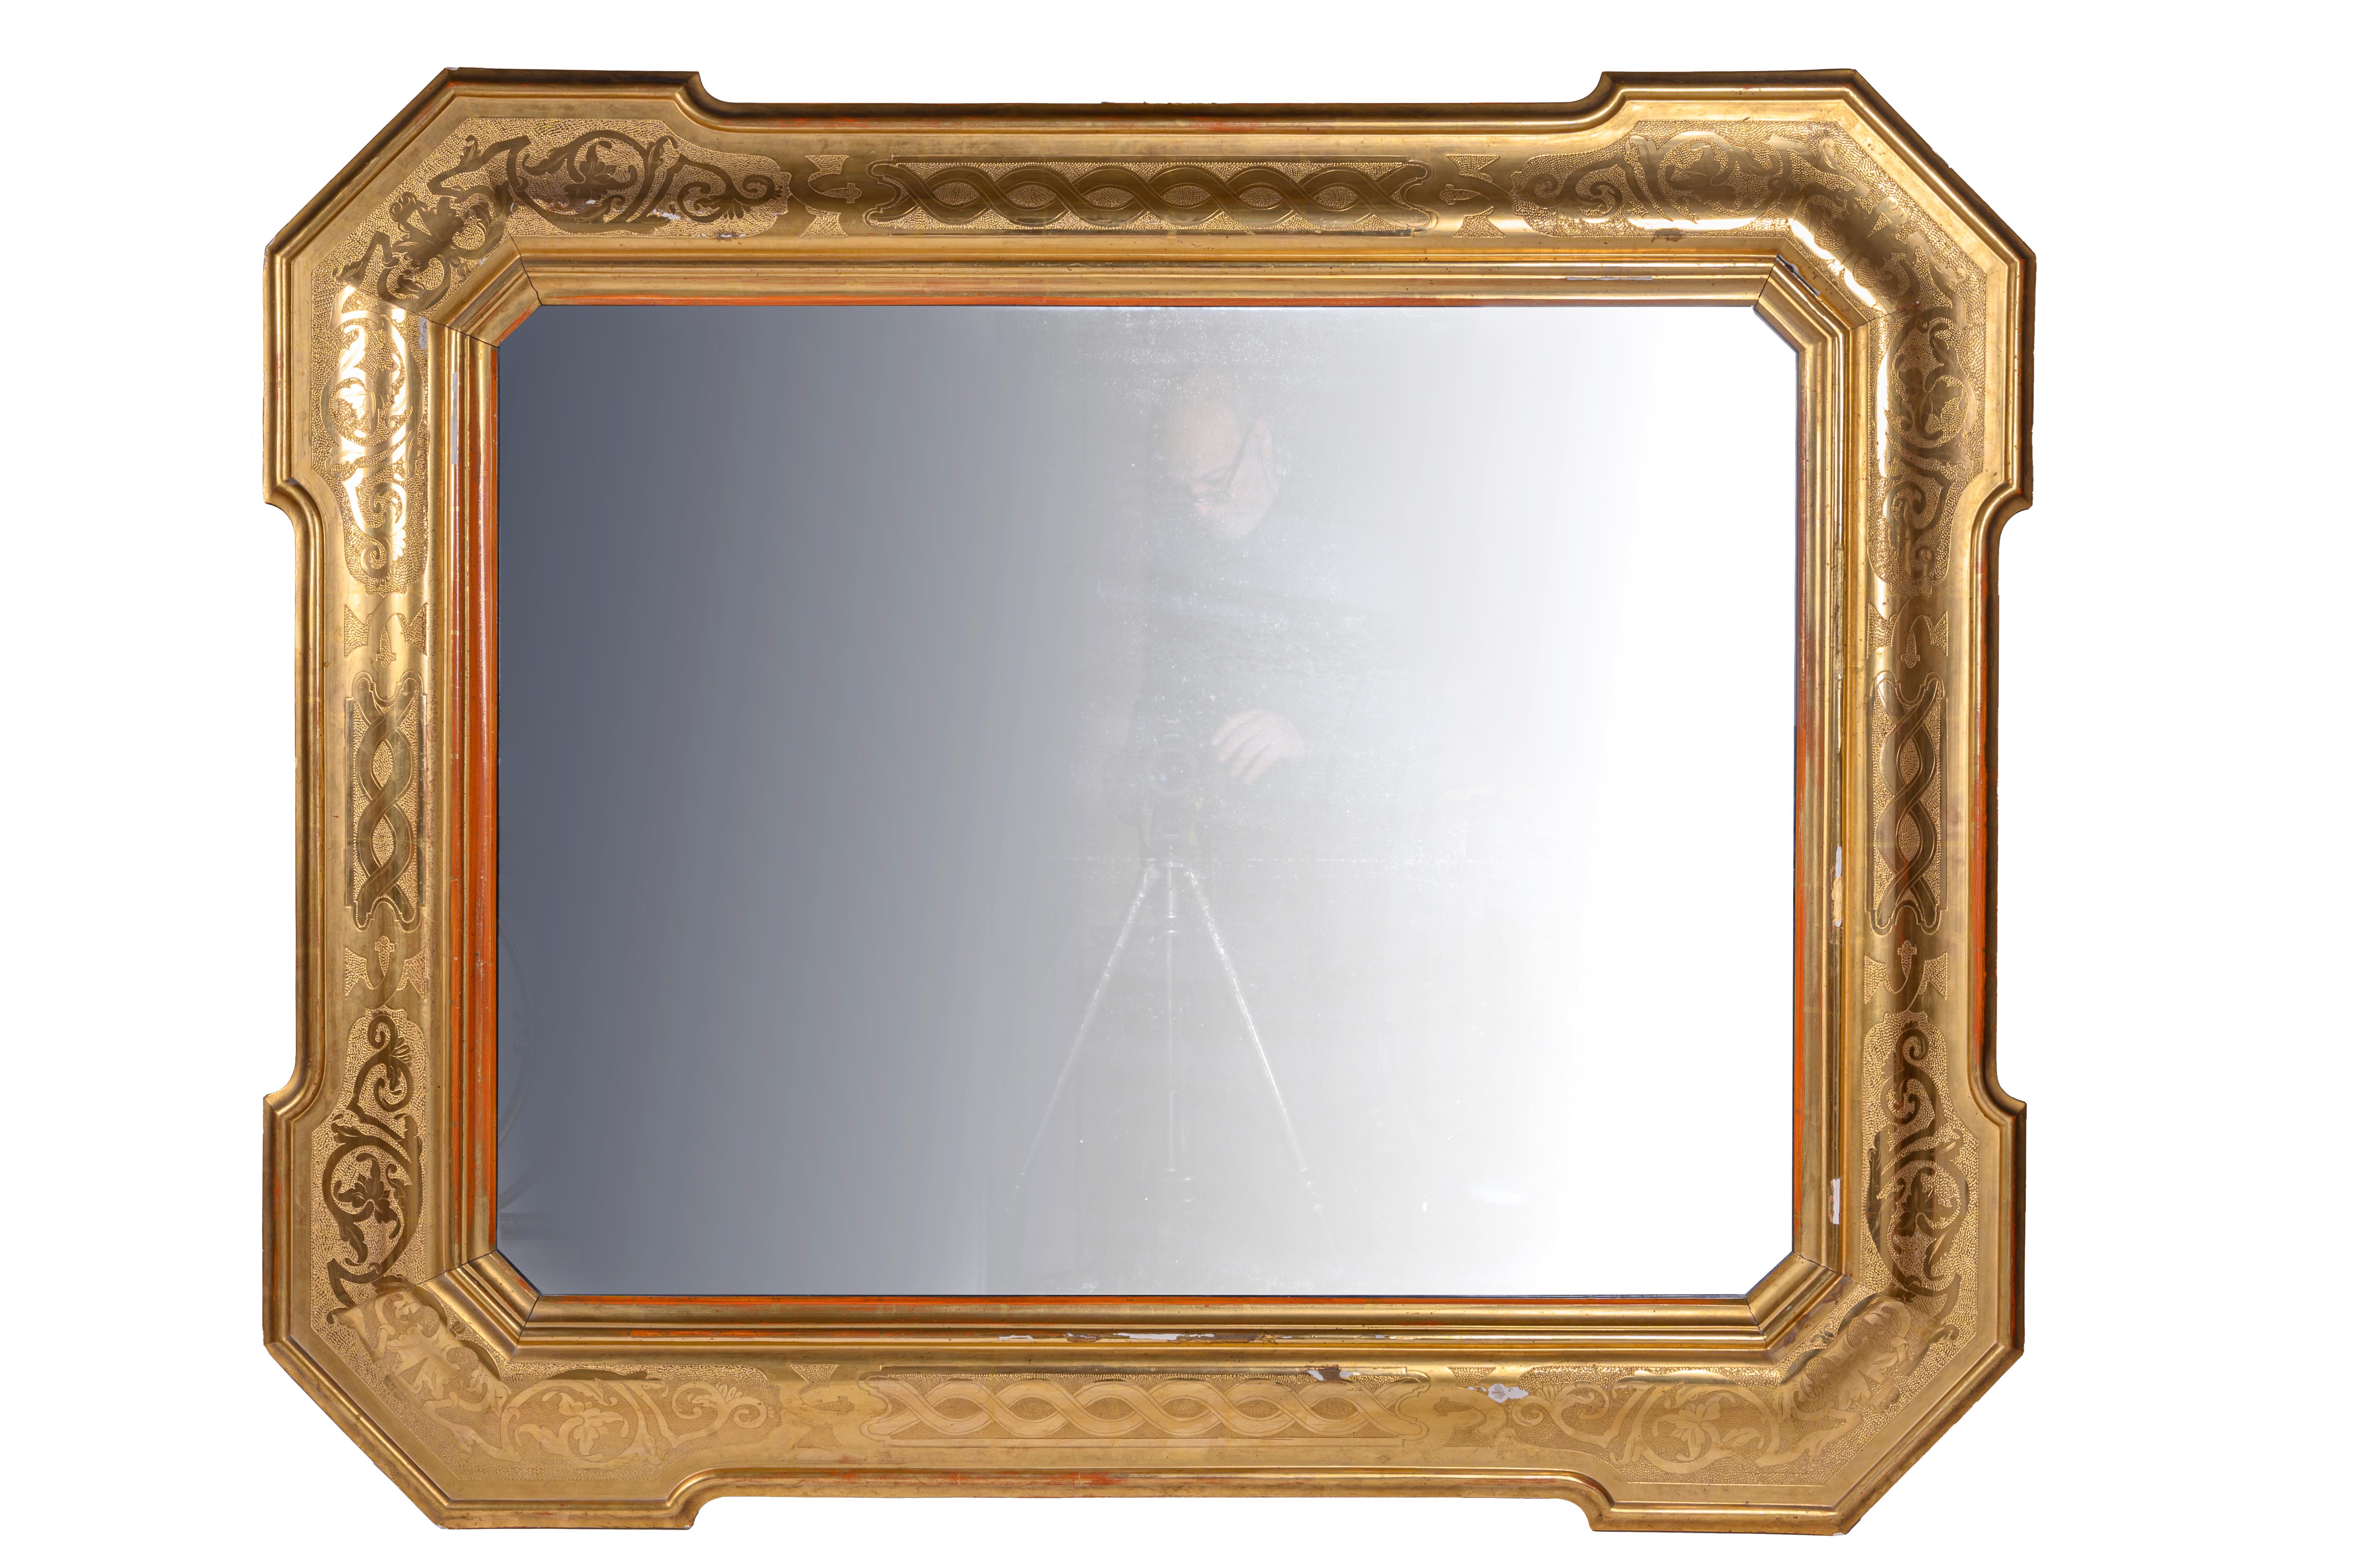 From Italy a mid-19th century carved and golden leaf gilded wooden mirror with antique original dark mercury glass, in a whole plate.
This shaped Louis Philippe Italian frame is finely carved with bulino and punched ground, finely decorated with